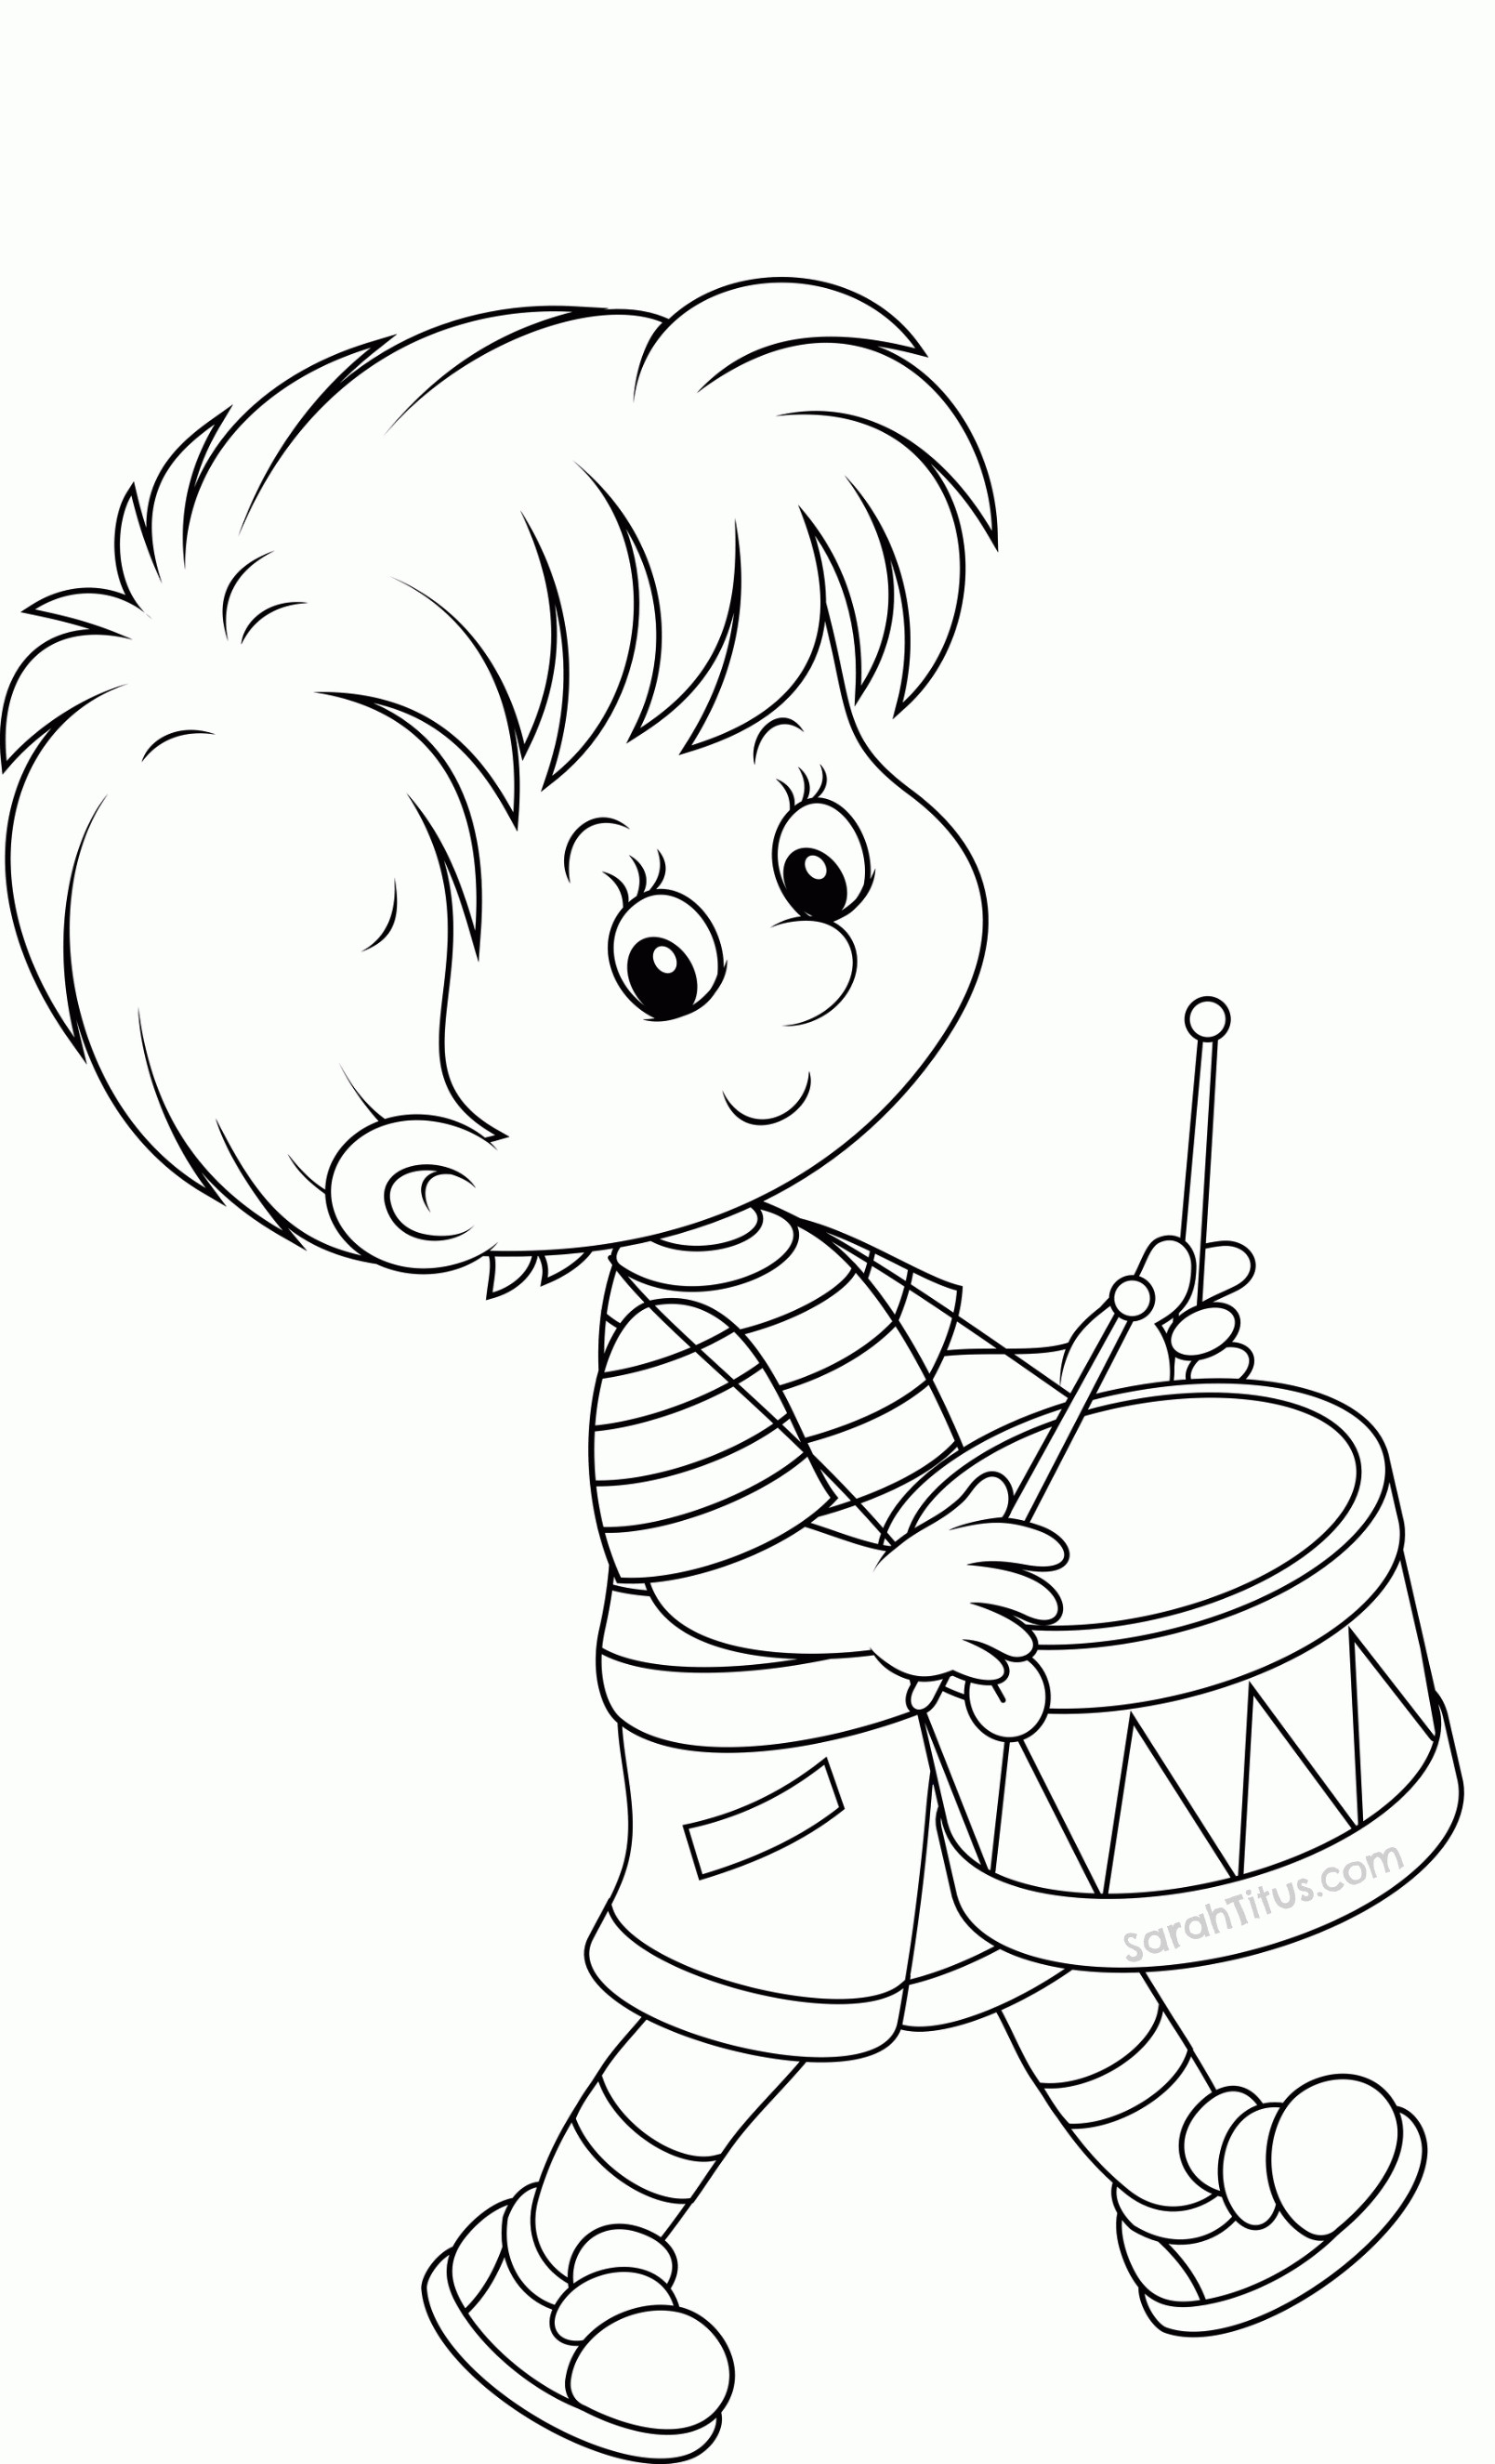 Boys Coloring Pages Online
 A Coloring Page A Little Boy Coloring Home